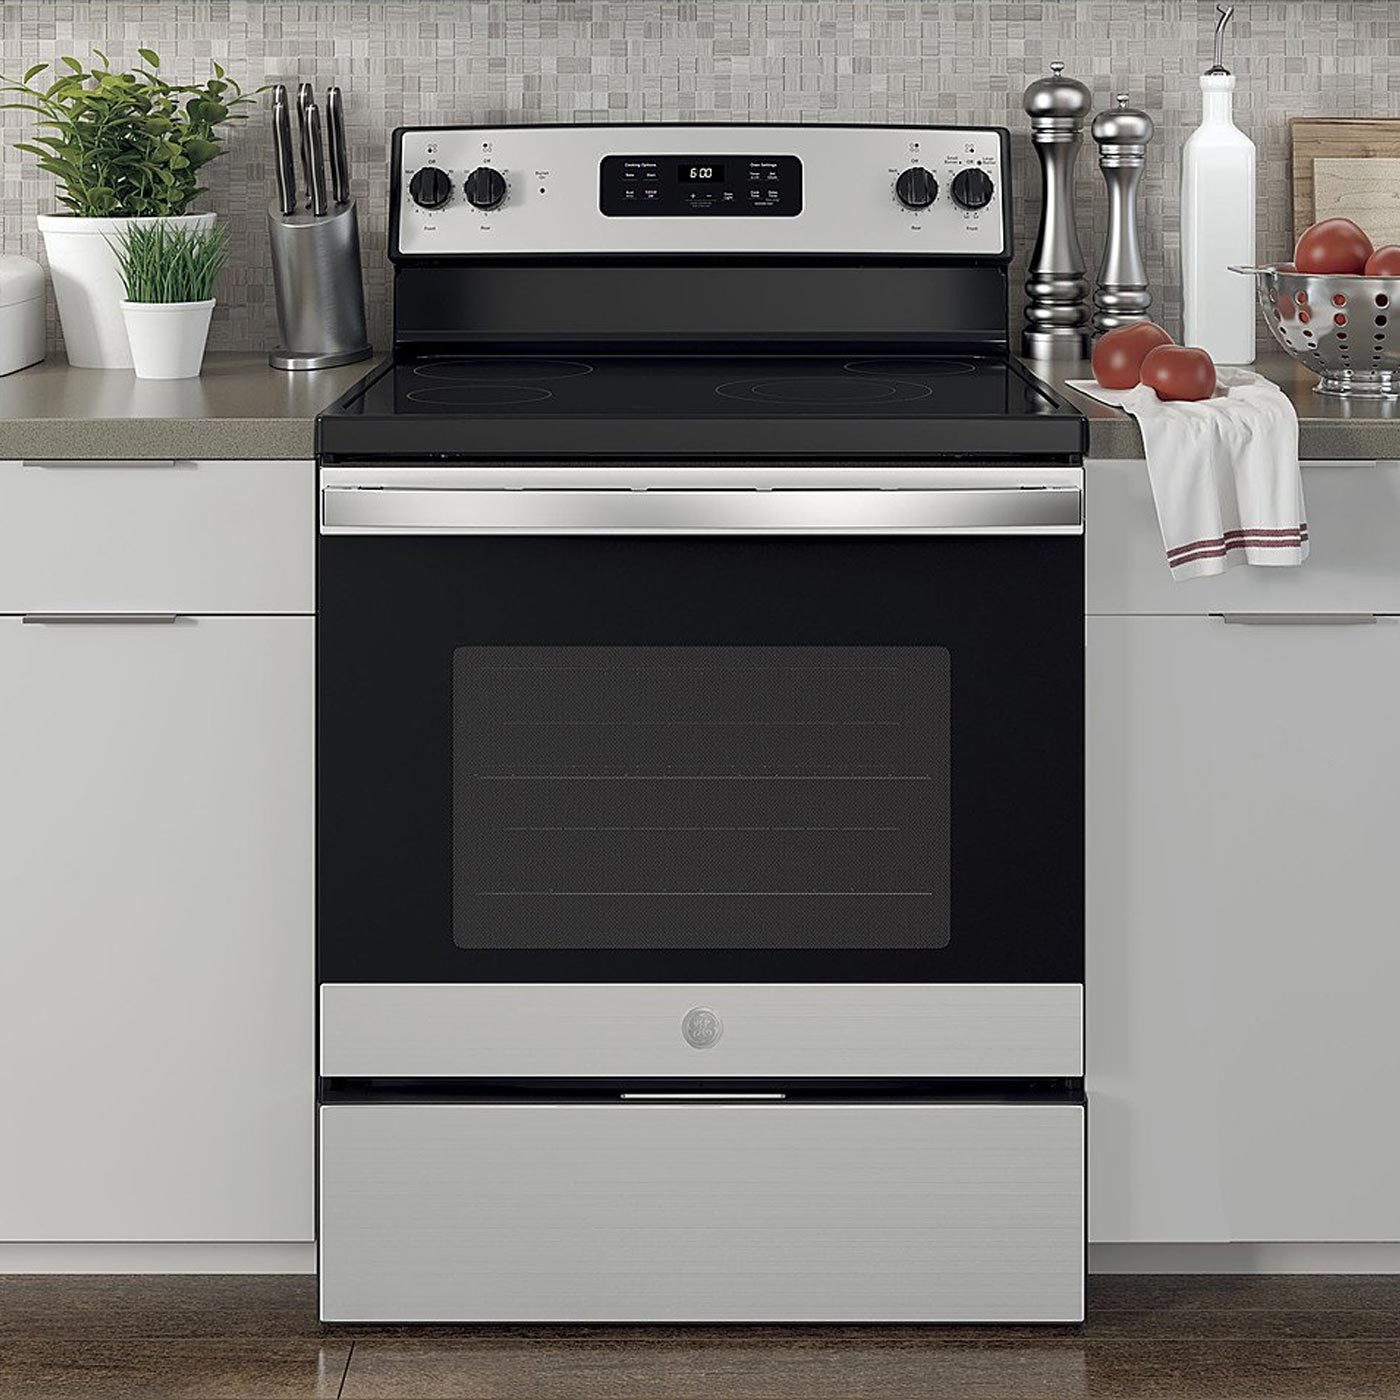 7 Energy-Efficient Alternatives to Your Oven or Stove